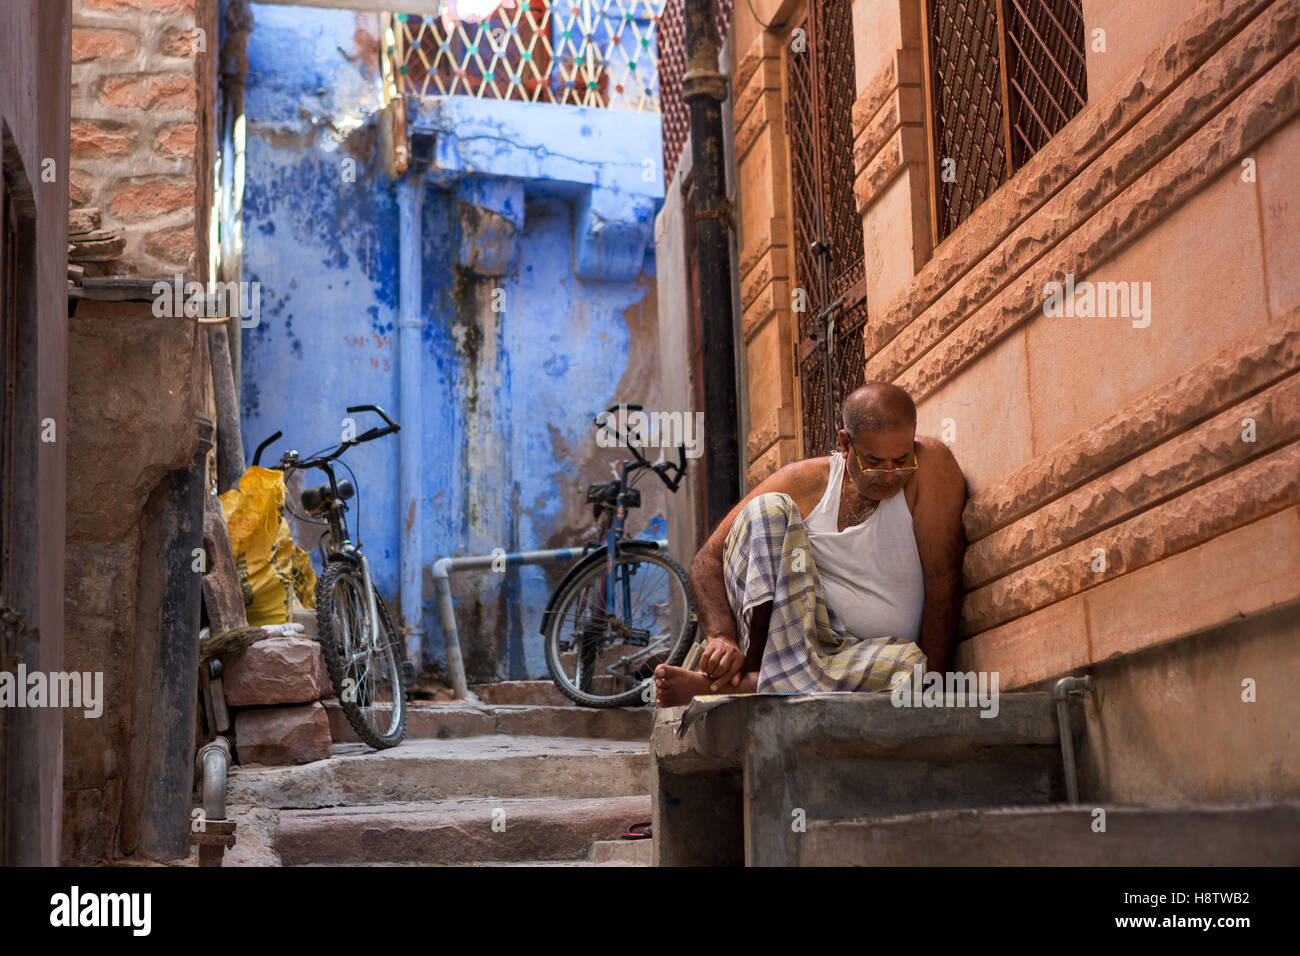 Jodhpur is famous city with its blue buildings and narrow streets. Stock Photo